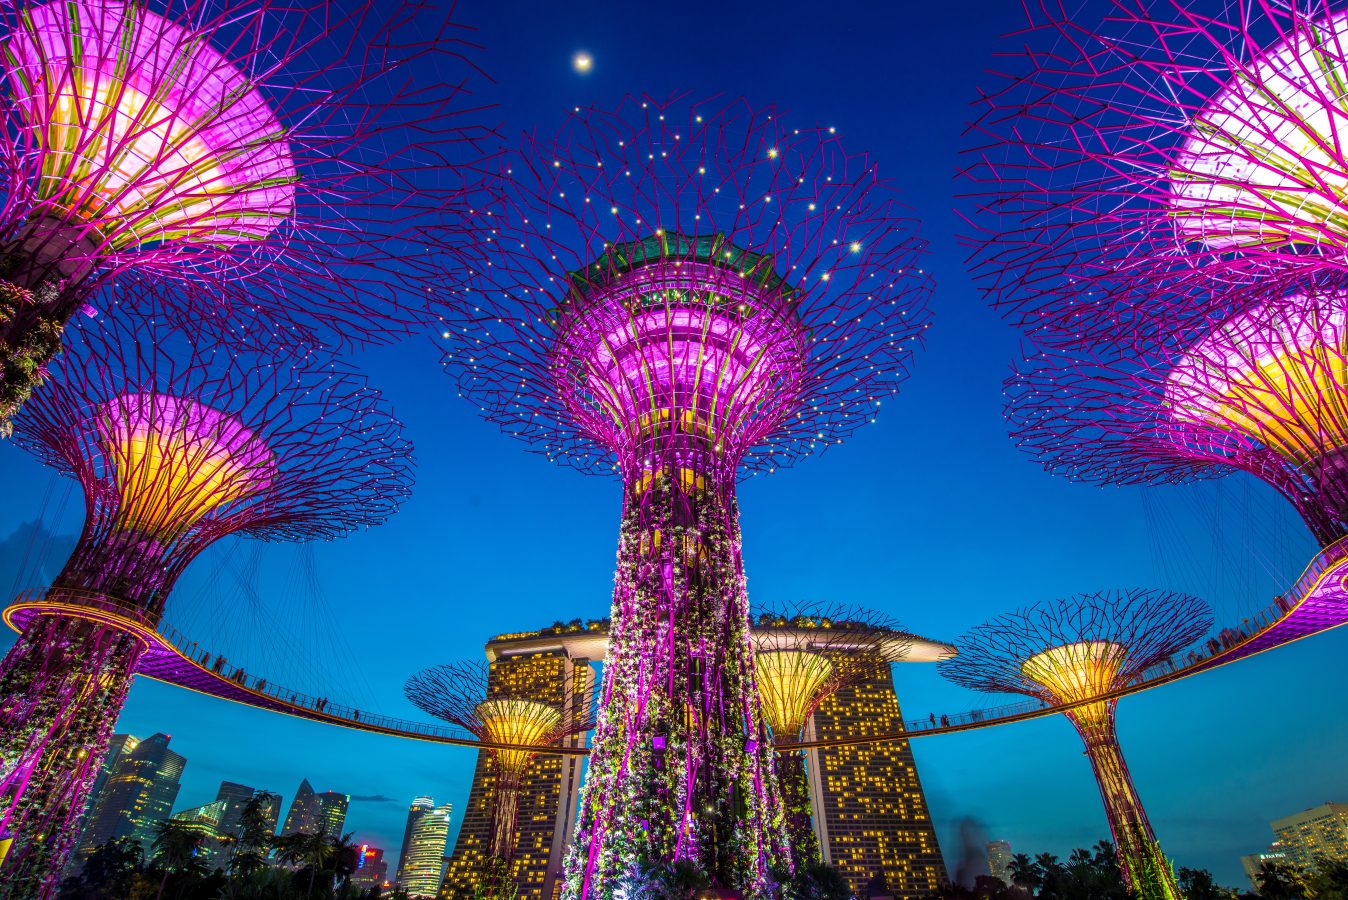 The Gardens by the Bay in Singapore at night all lit up.